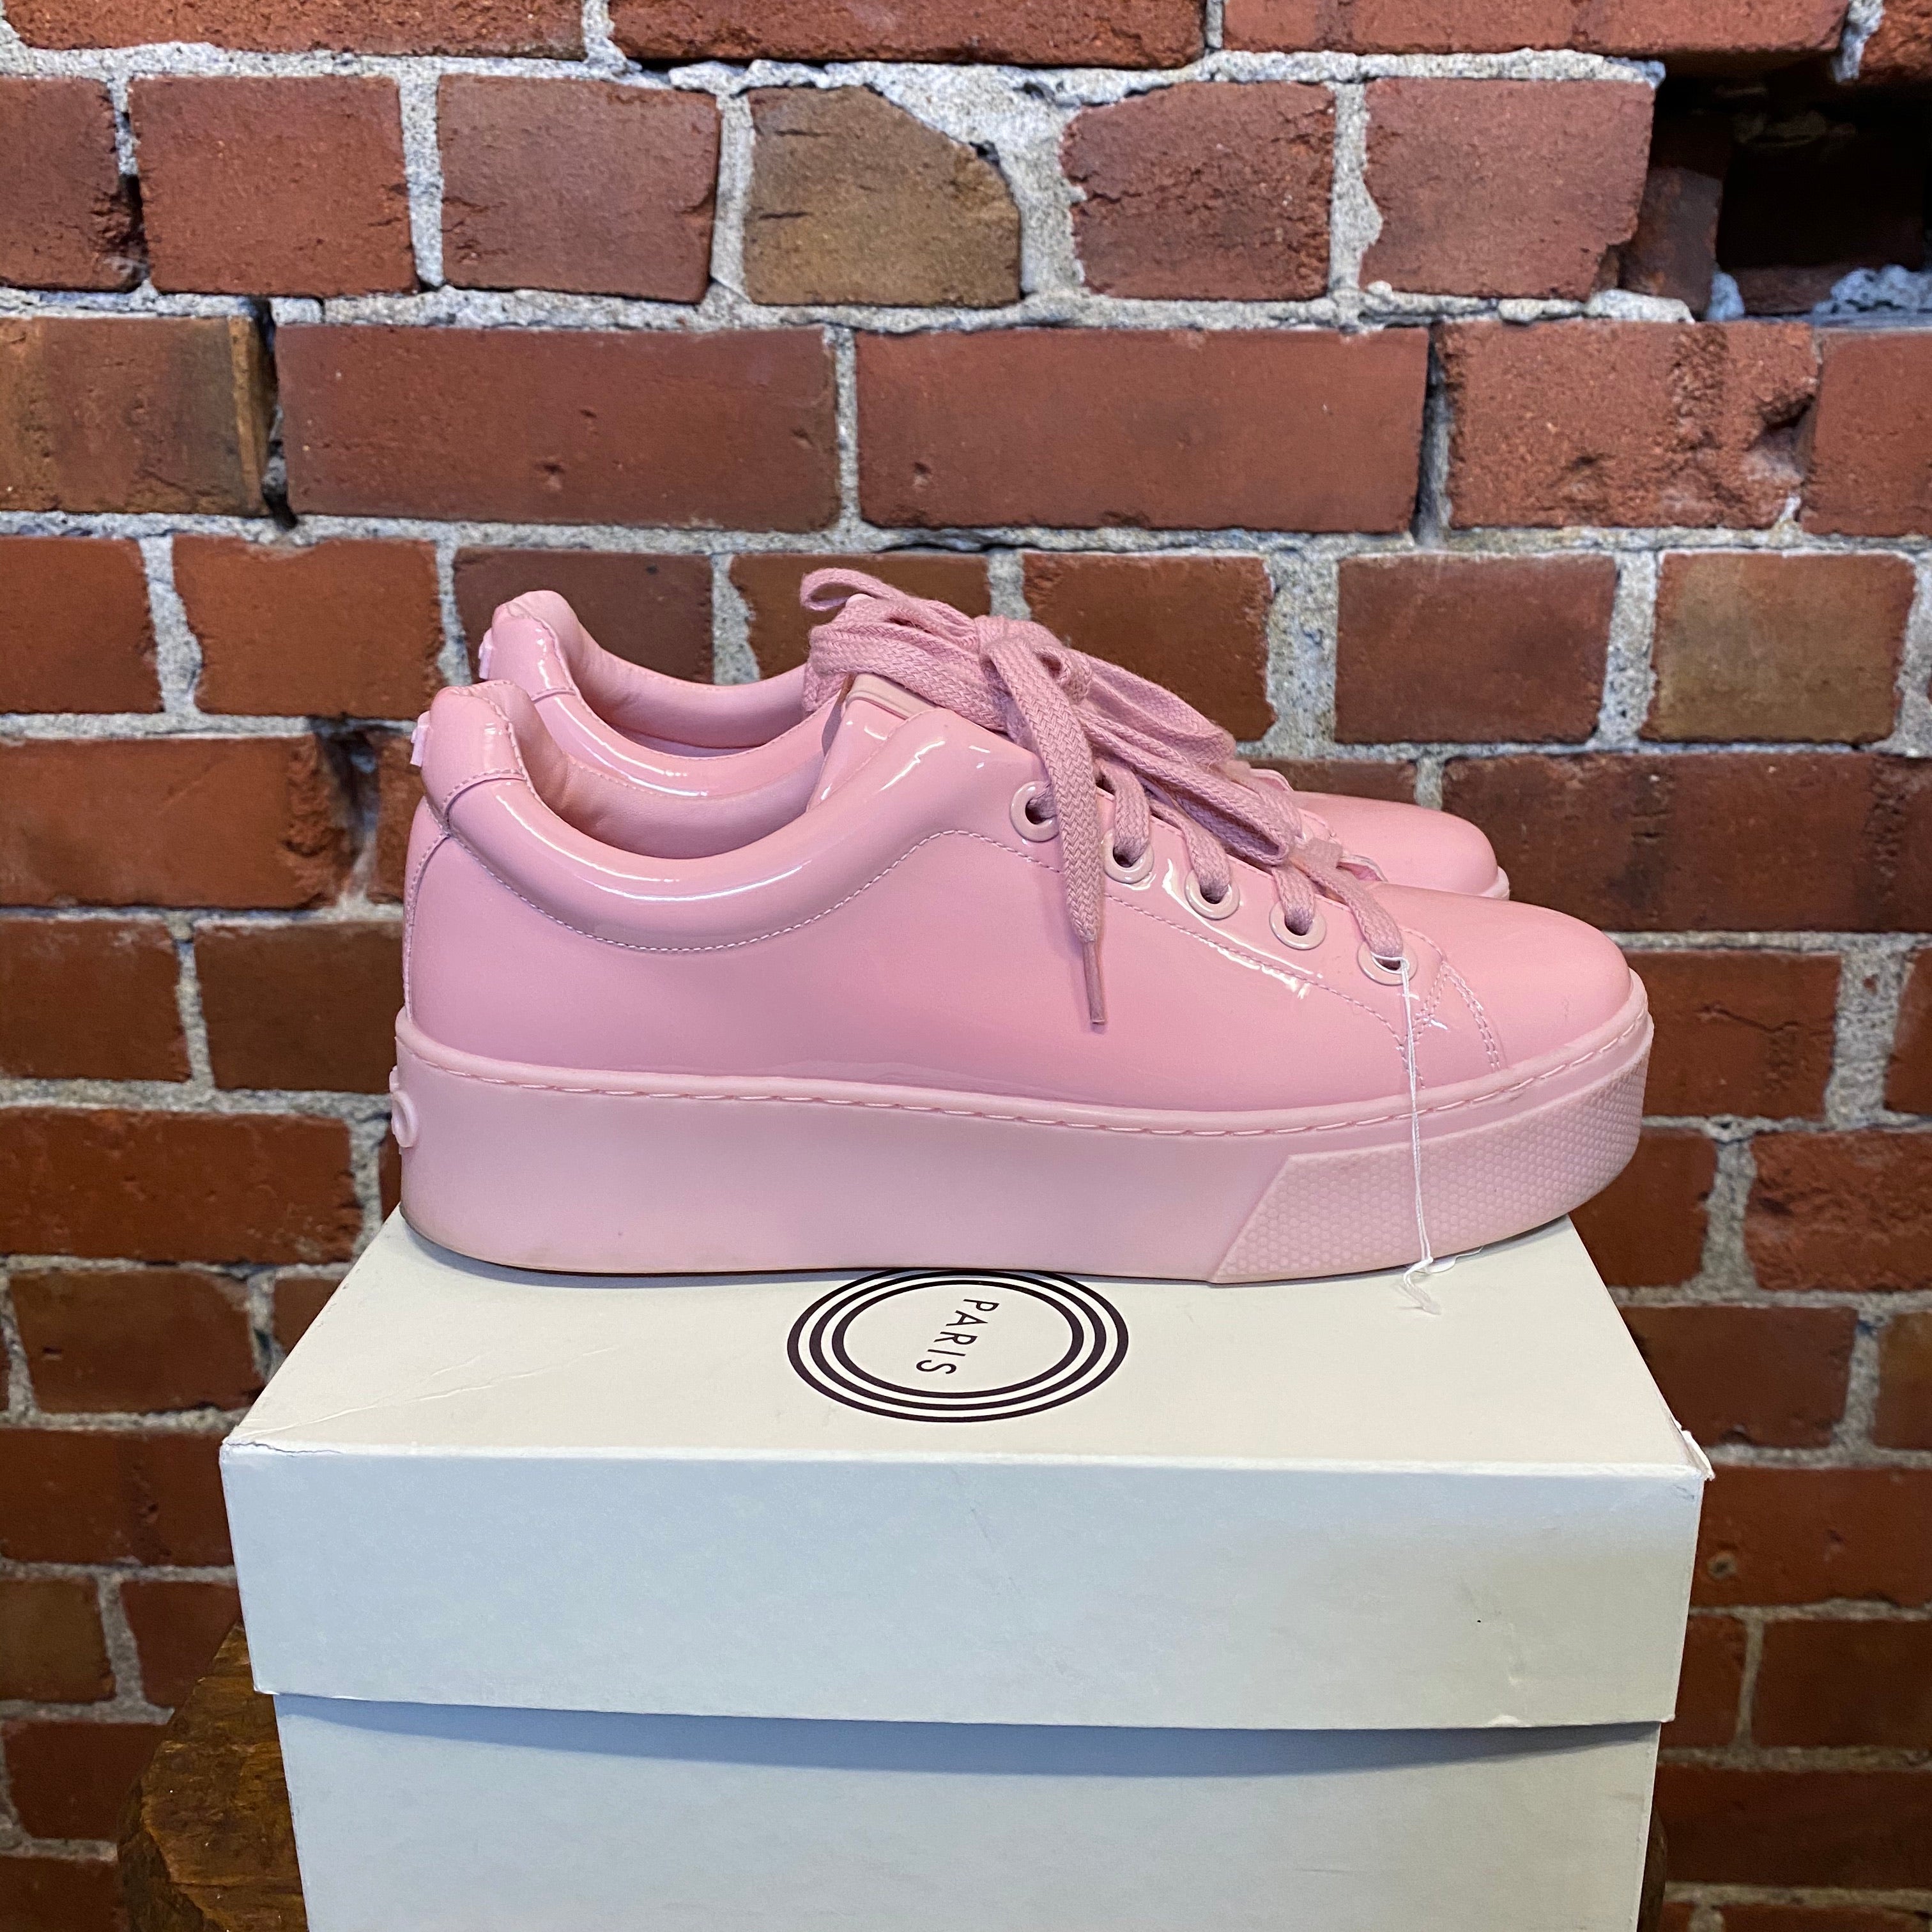 KENZO patent pink sneakers 39 Hunters and Collectors